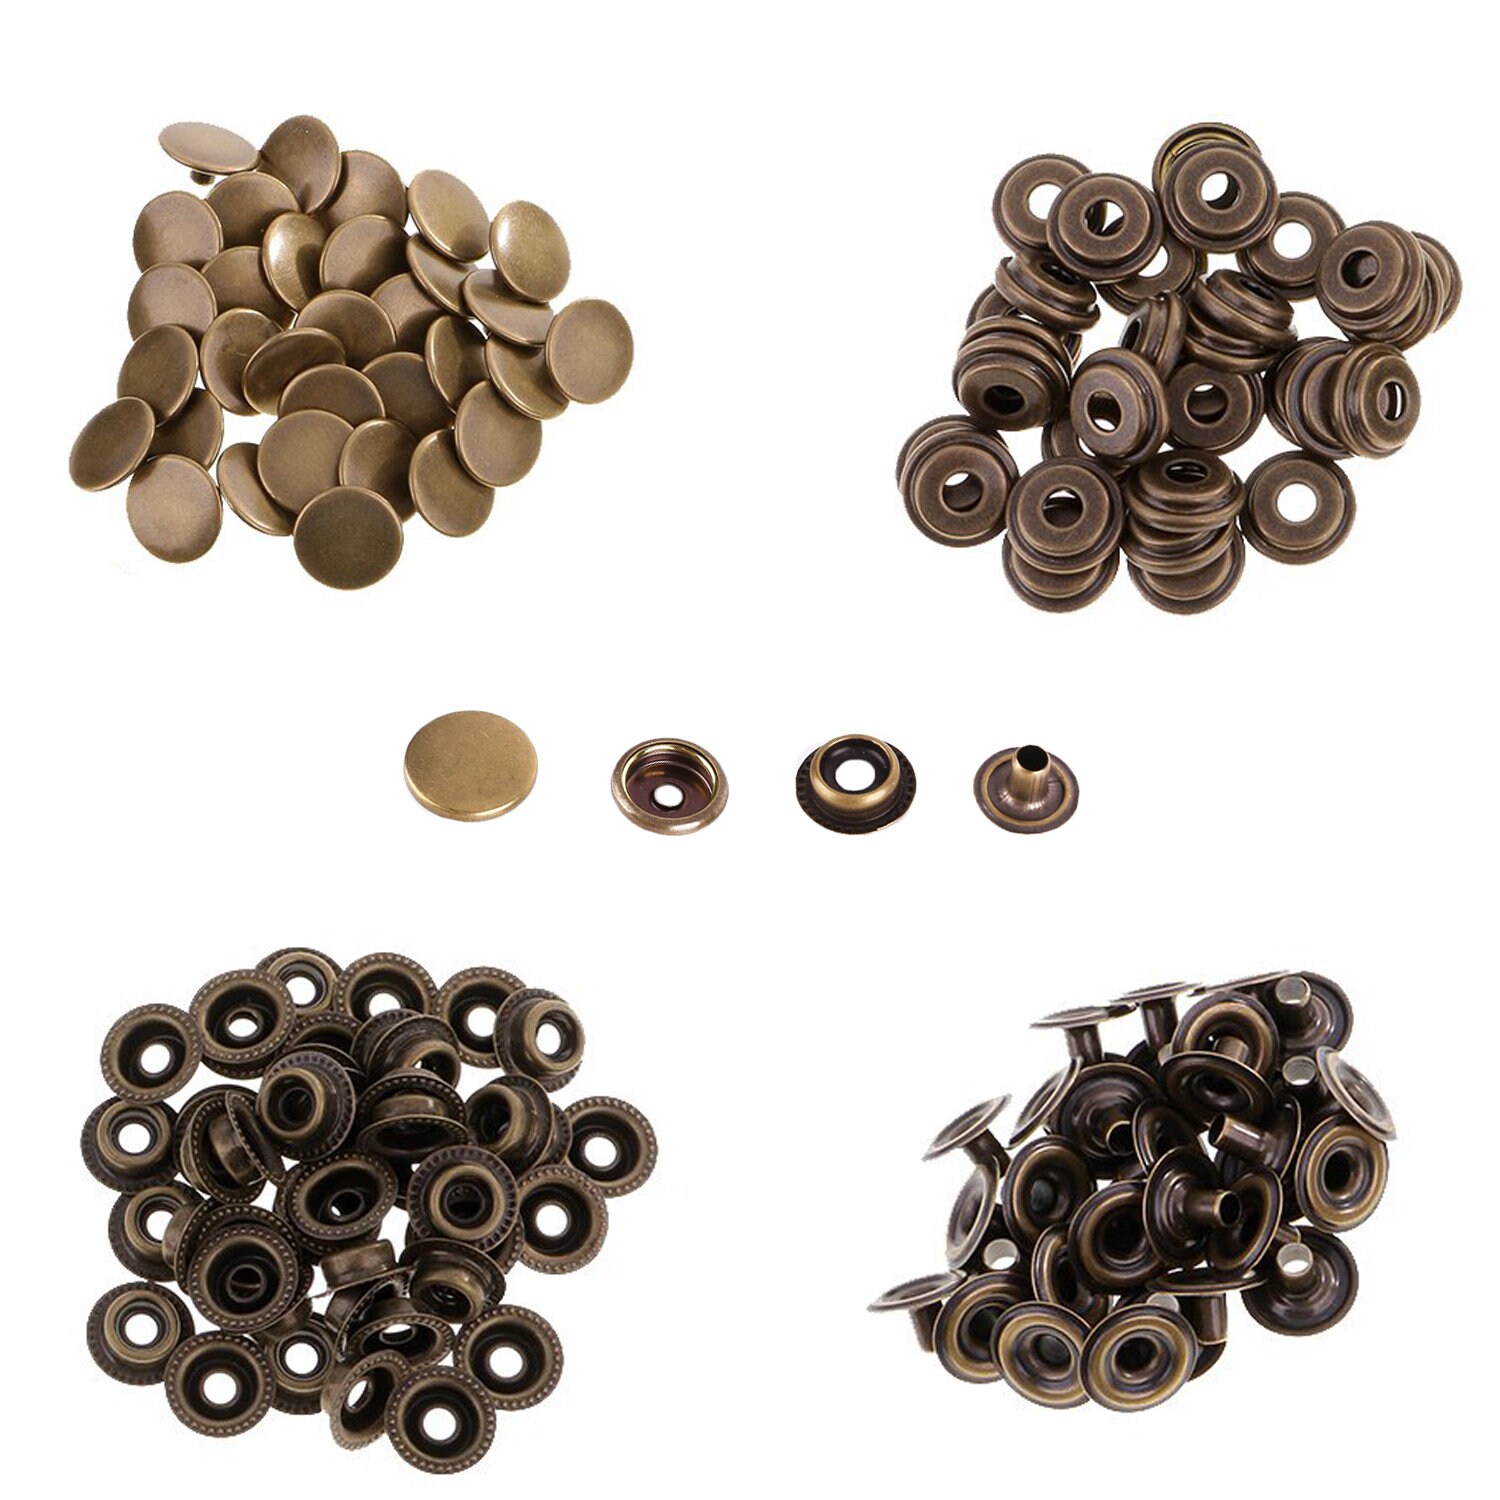 20mm Press Studs Snap Button Fasteners Four Part Press Studs Heavy Duty  Snaps for Leathercrafts, Jackets, Purses, Handbags, Craft Projects 